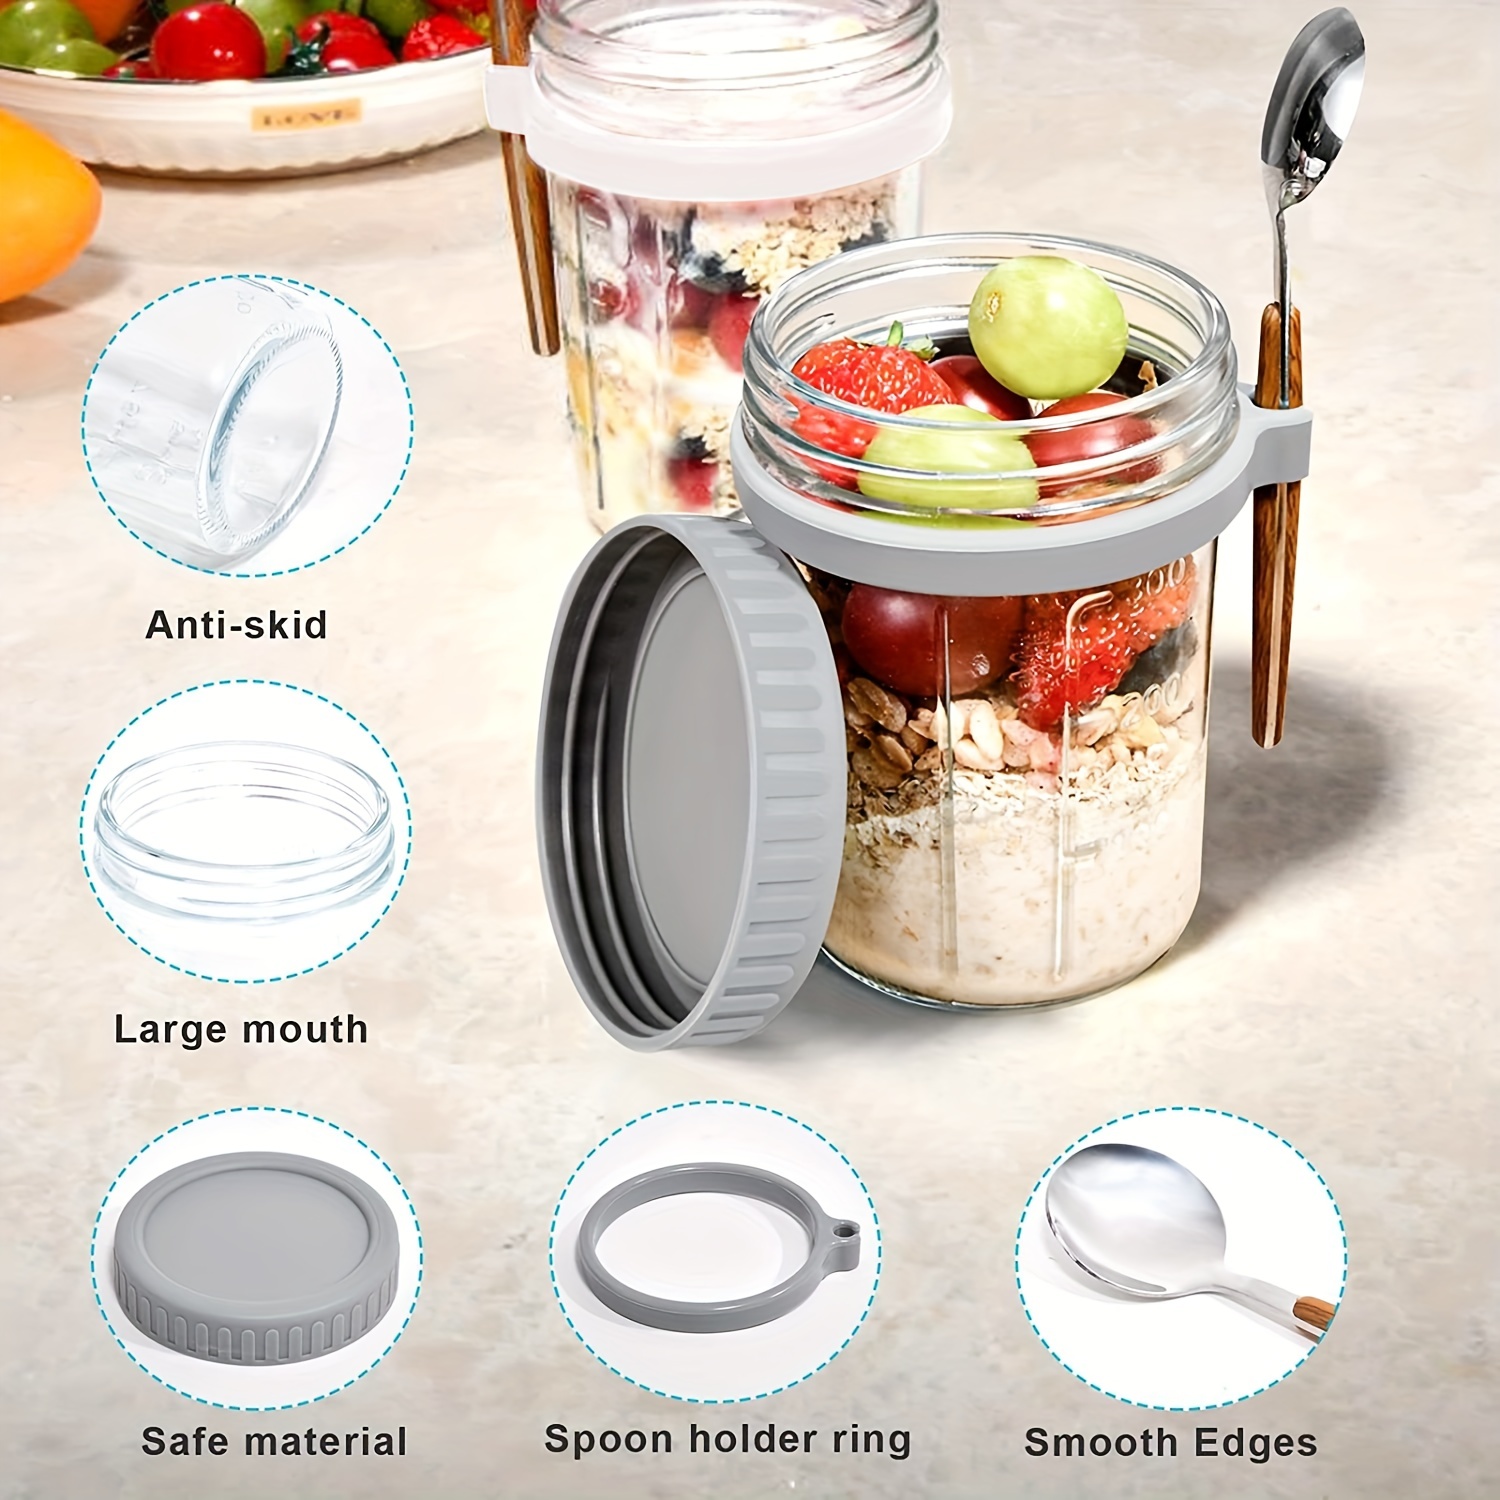 Mason Jars for Overnight Oats: 4 Pack Overnight Oats Containers with Lids  and Spoons - 16 oz Glass Food Storage Containers for Milk, Cereal, Fruit 